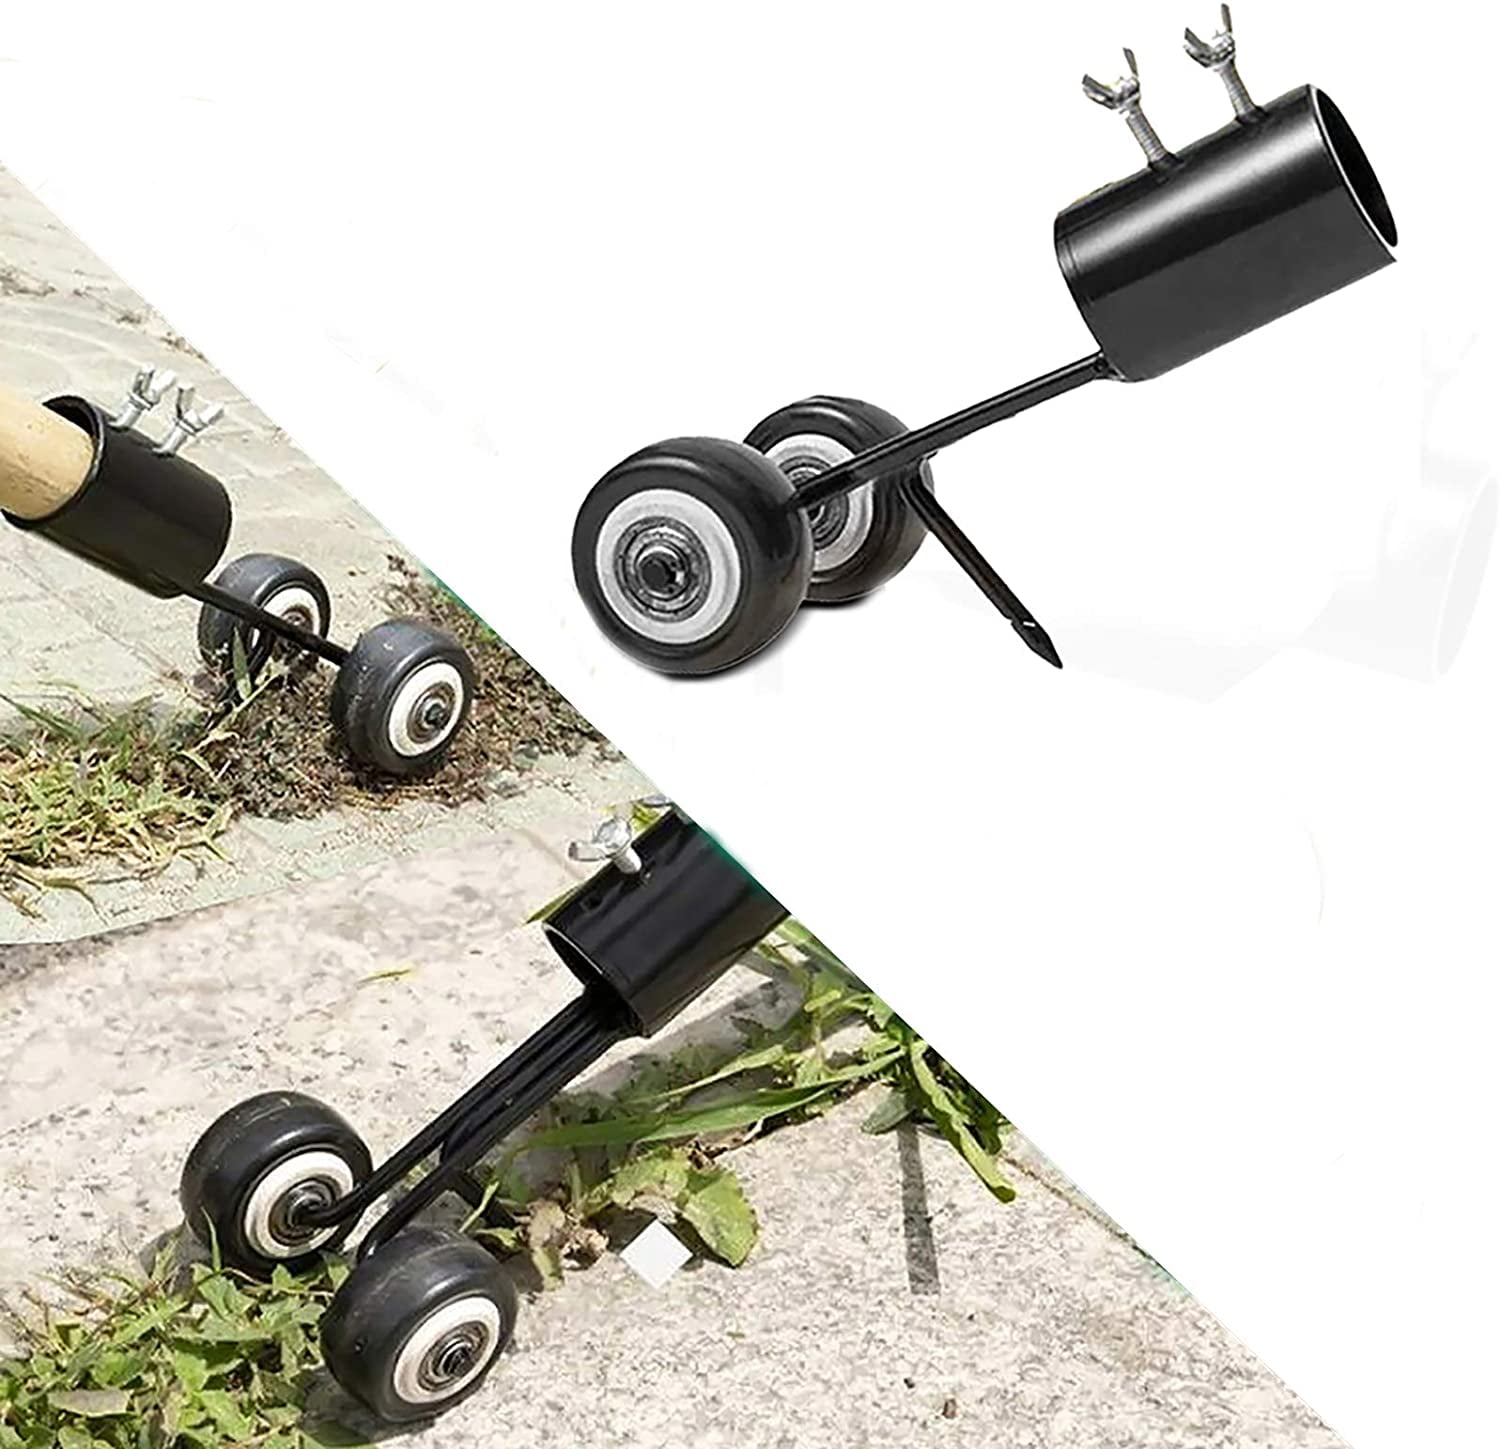 Adjustable Weeds Snatcher Crack and Crevice Weeding Removal Tool Garden Manual Weeder Tool for Garden Patio Backyard Lawn Sidewalk Driveways Weeds Manual Weed Puller Tool Stand Up with Wheels